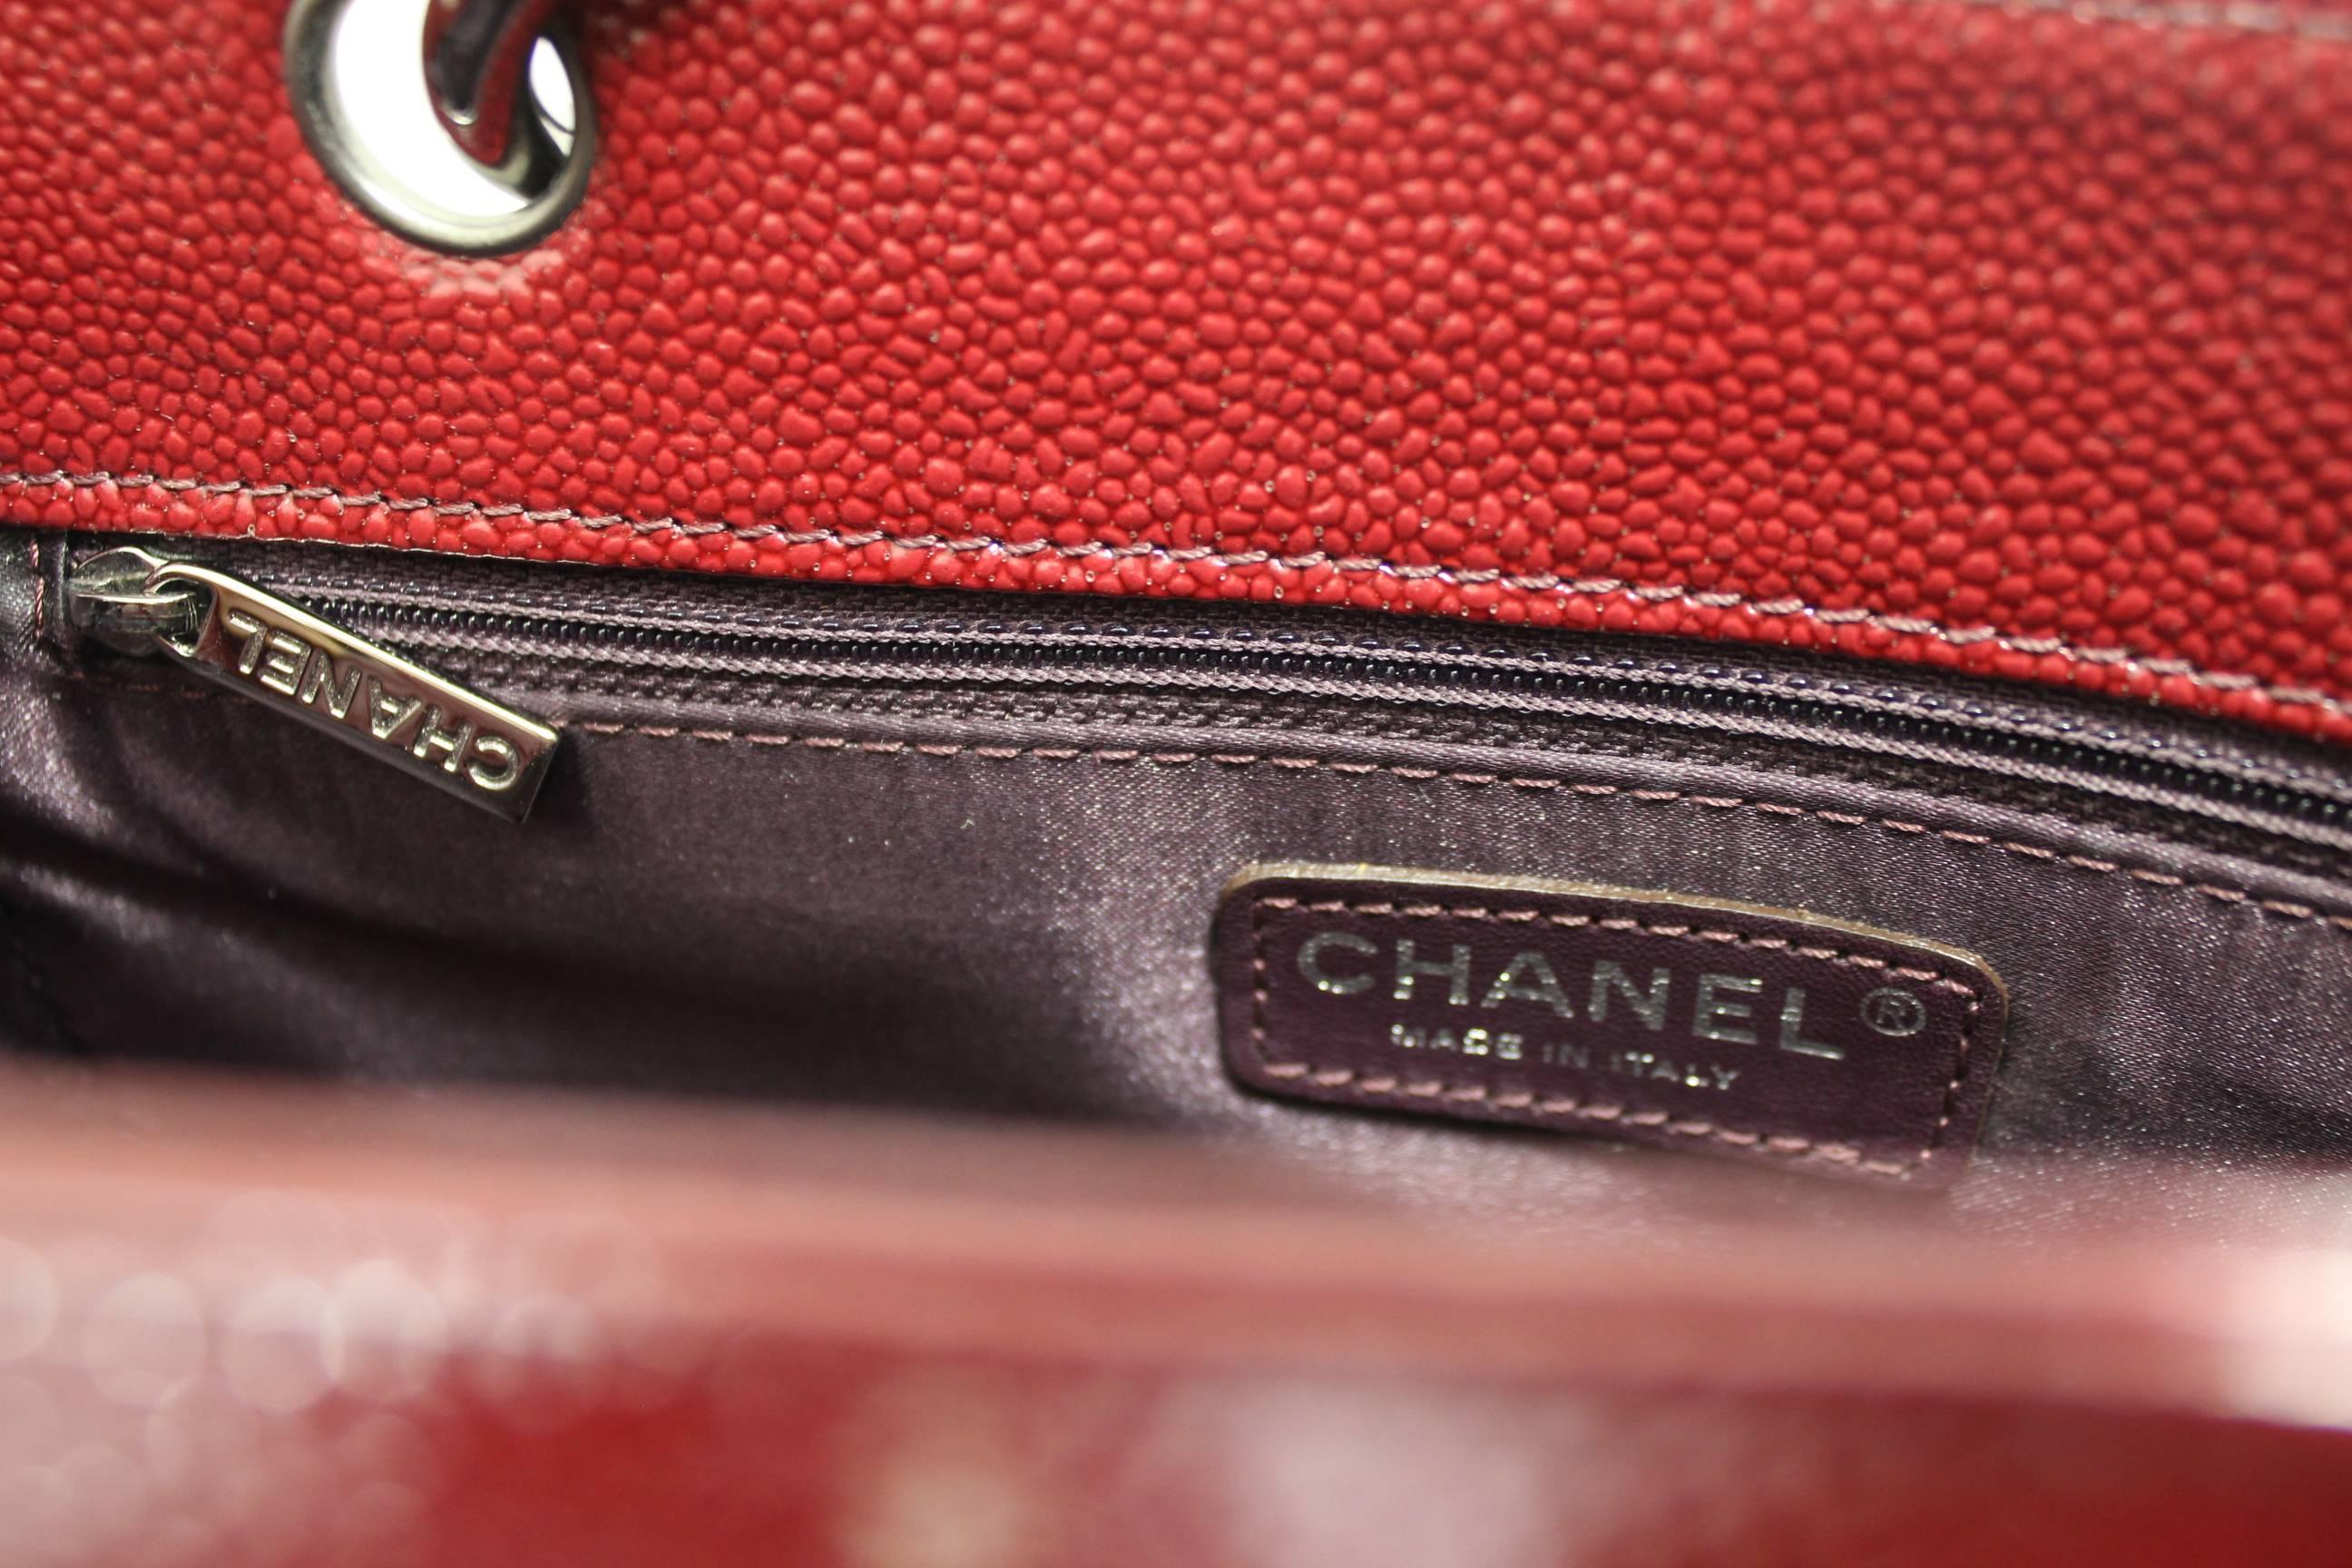 Brown Chanel 2.55 patented Leather Burgundy-Red Shopper Bag For Sale